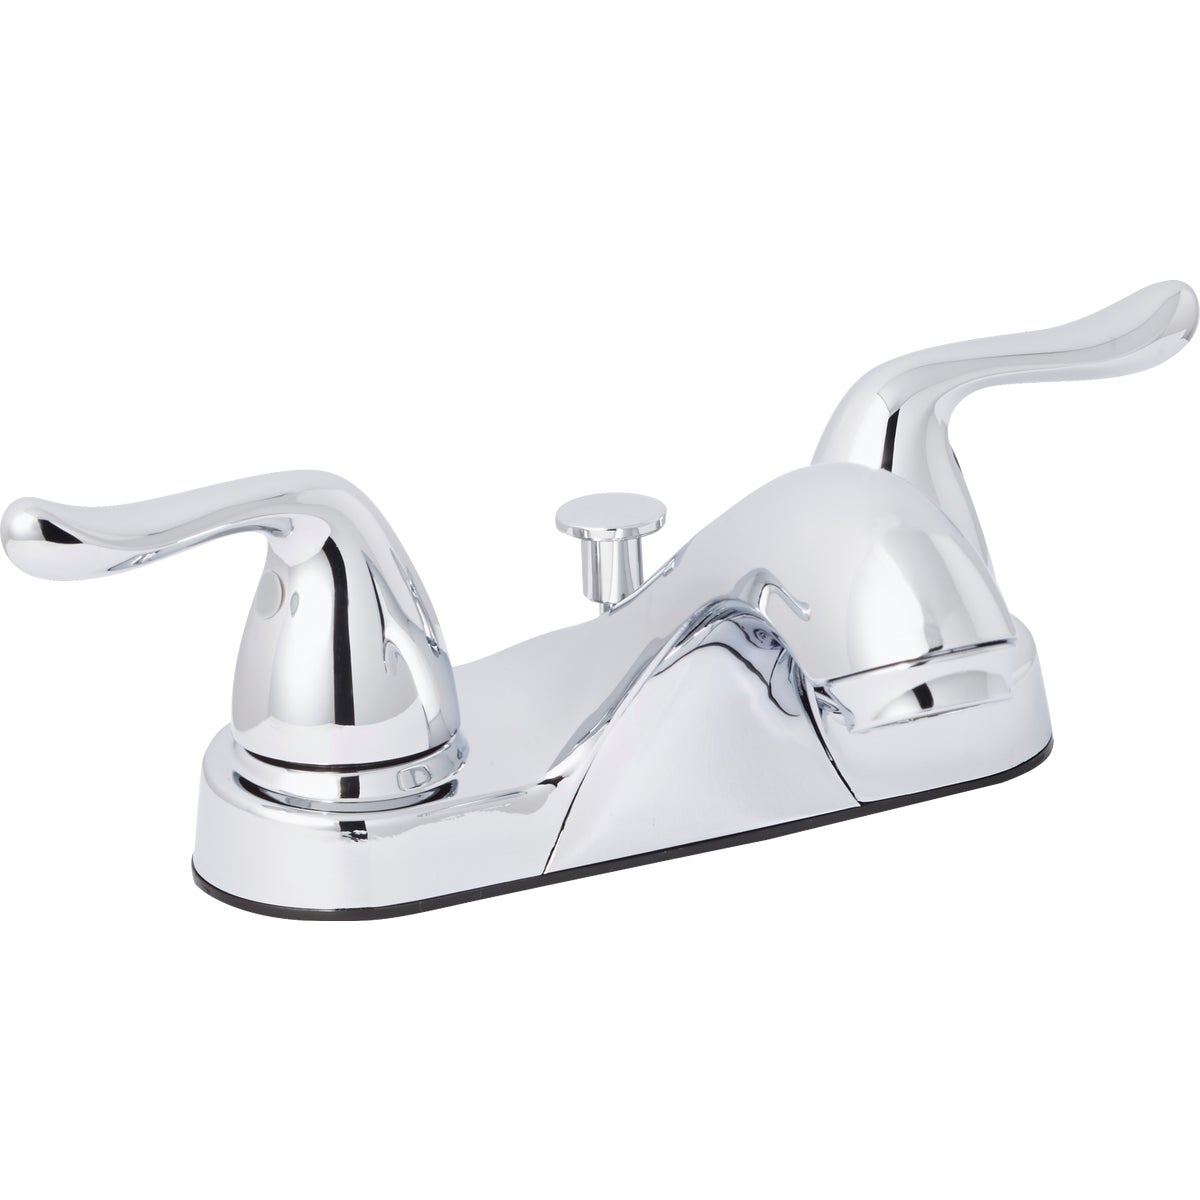 Home Impressions Polished Chrome 2-Handle Knob 4 In. Centerset Bathroom Faucet with Pop-Up